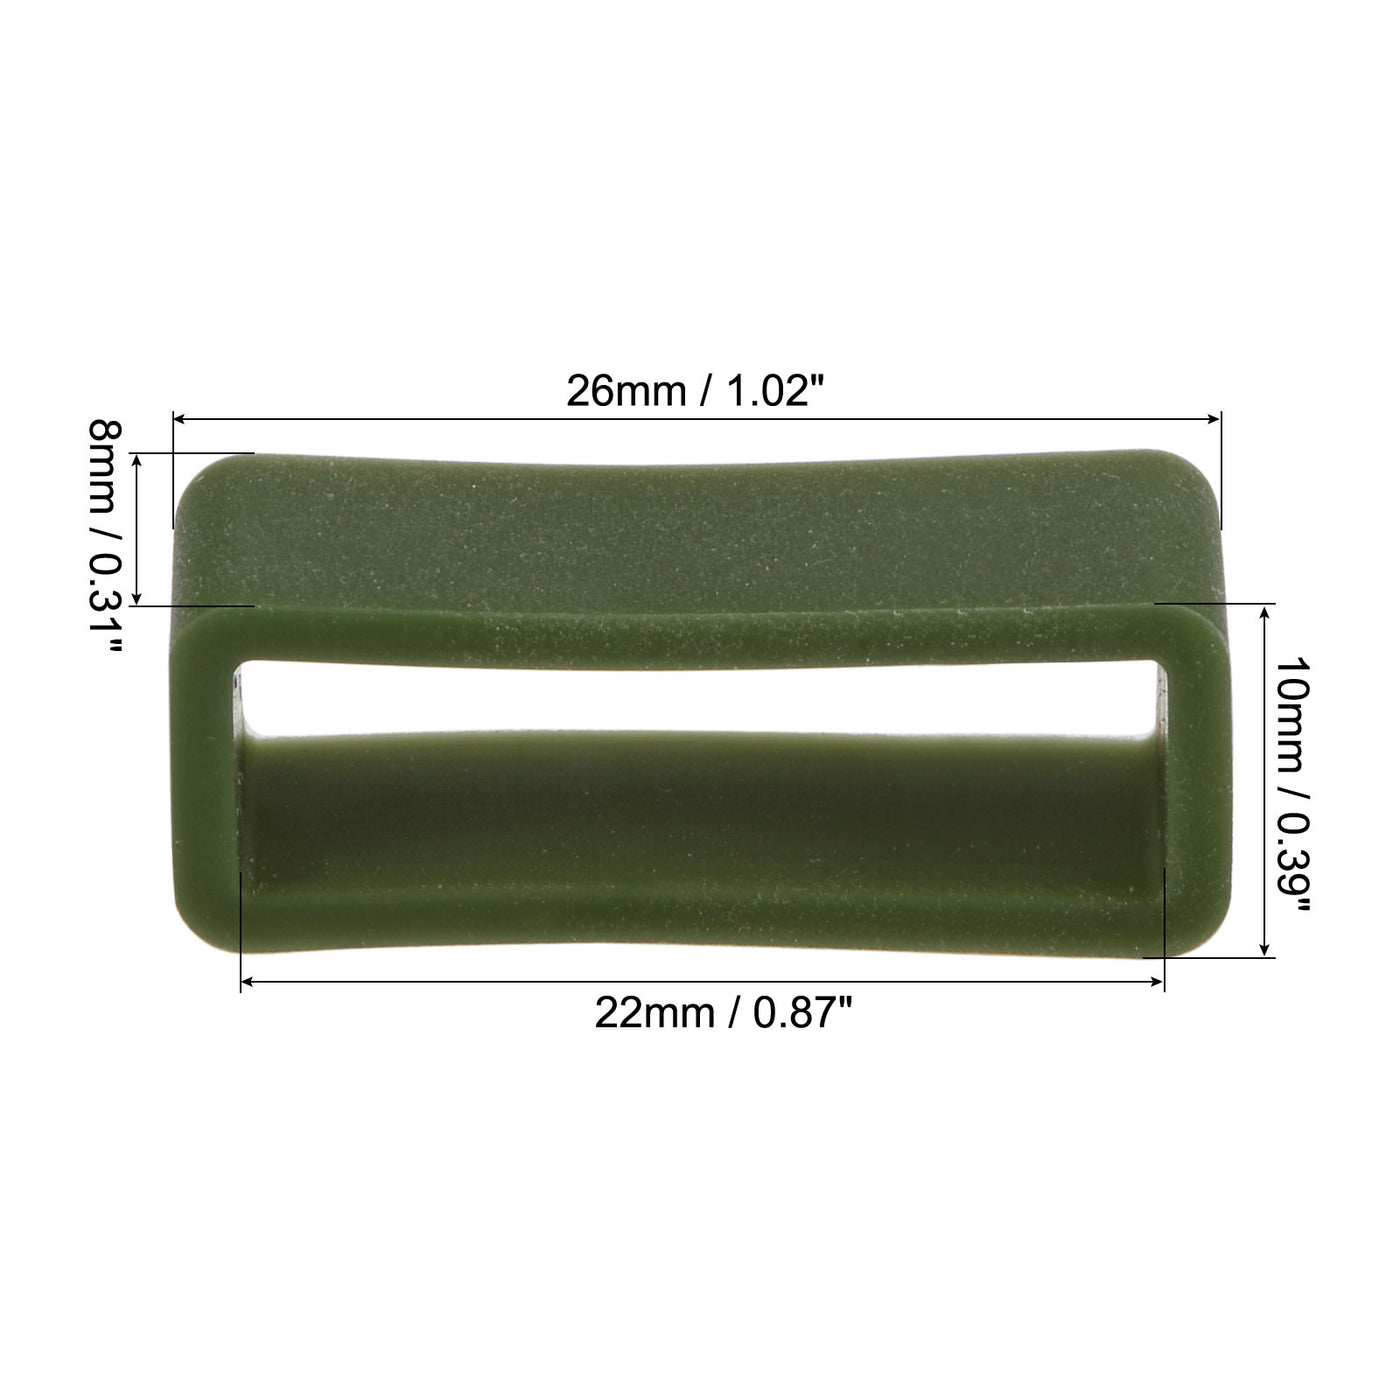 Uxcell Uxcell Watch Band Strap Loops Silicone for 22mm Width Watch Band, Dark Green 4 Pcs